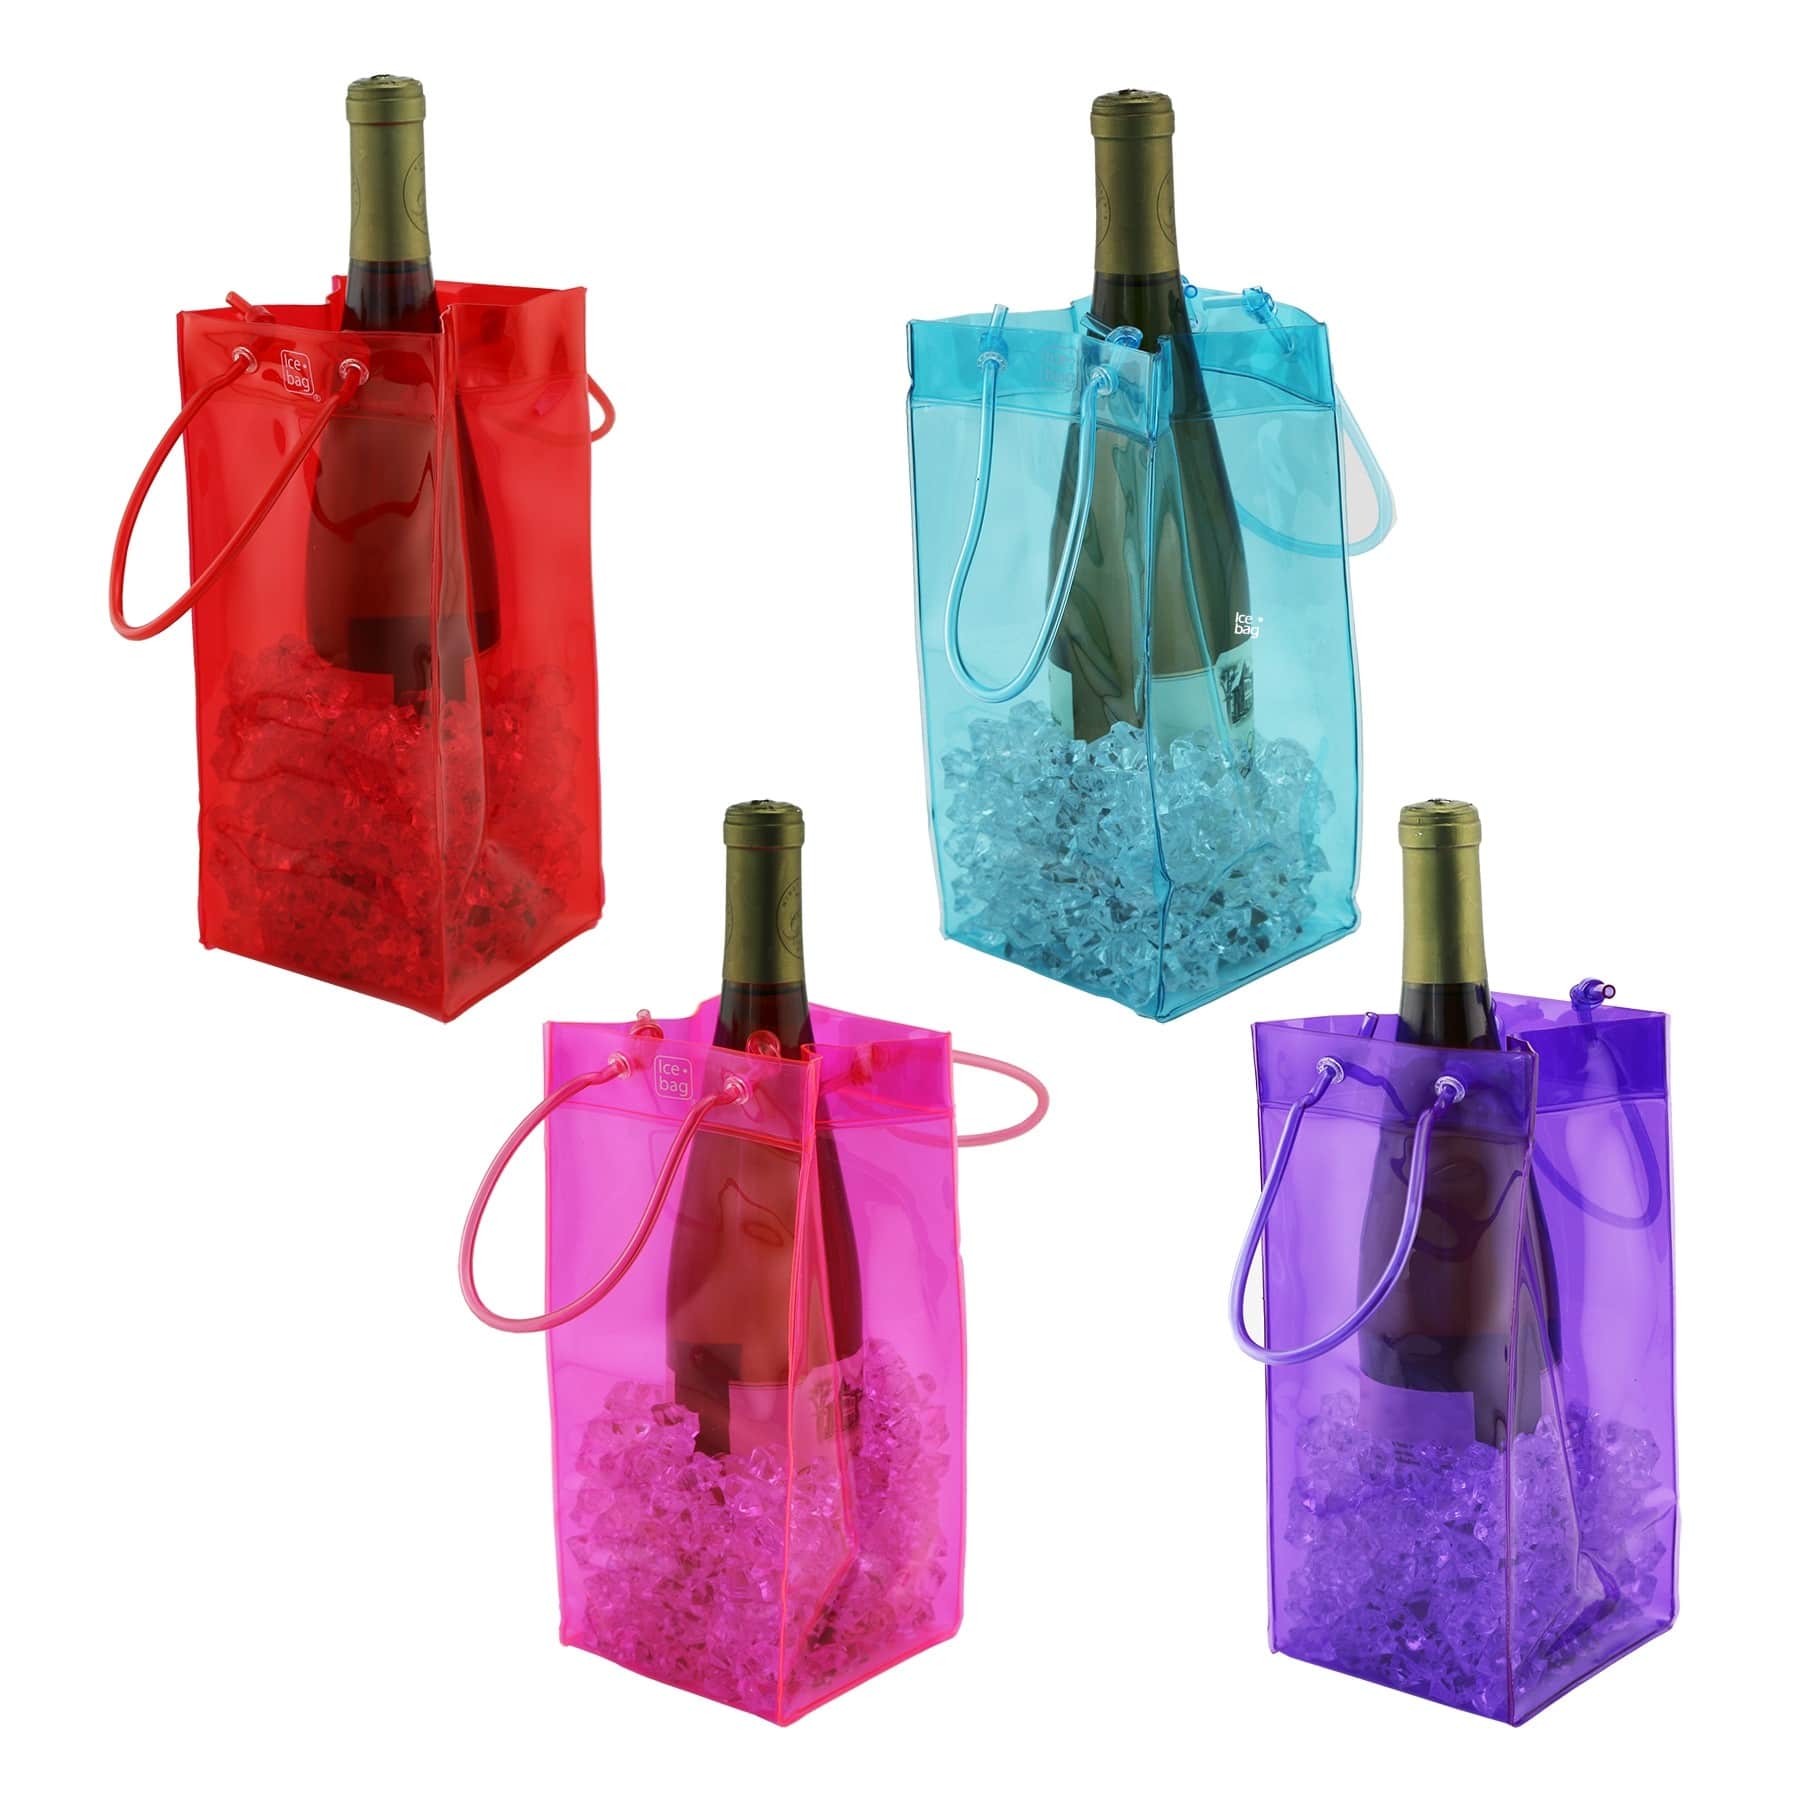 ICE BAG Collapsible Wine Cooler Bag, Made in France